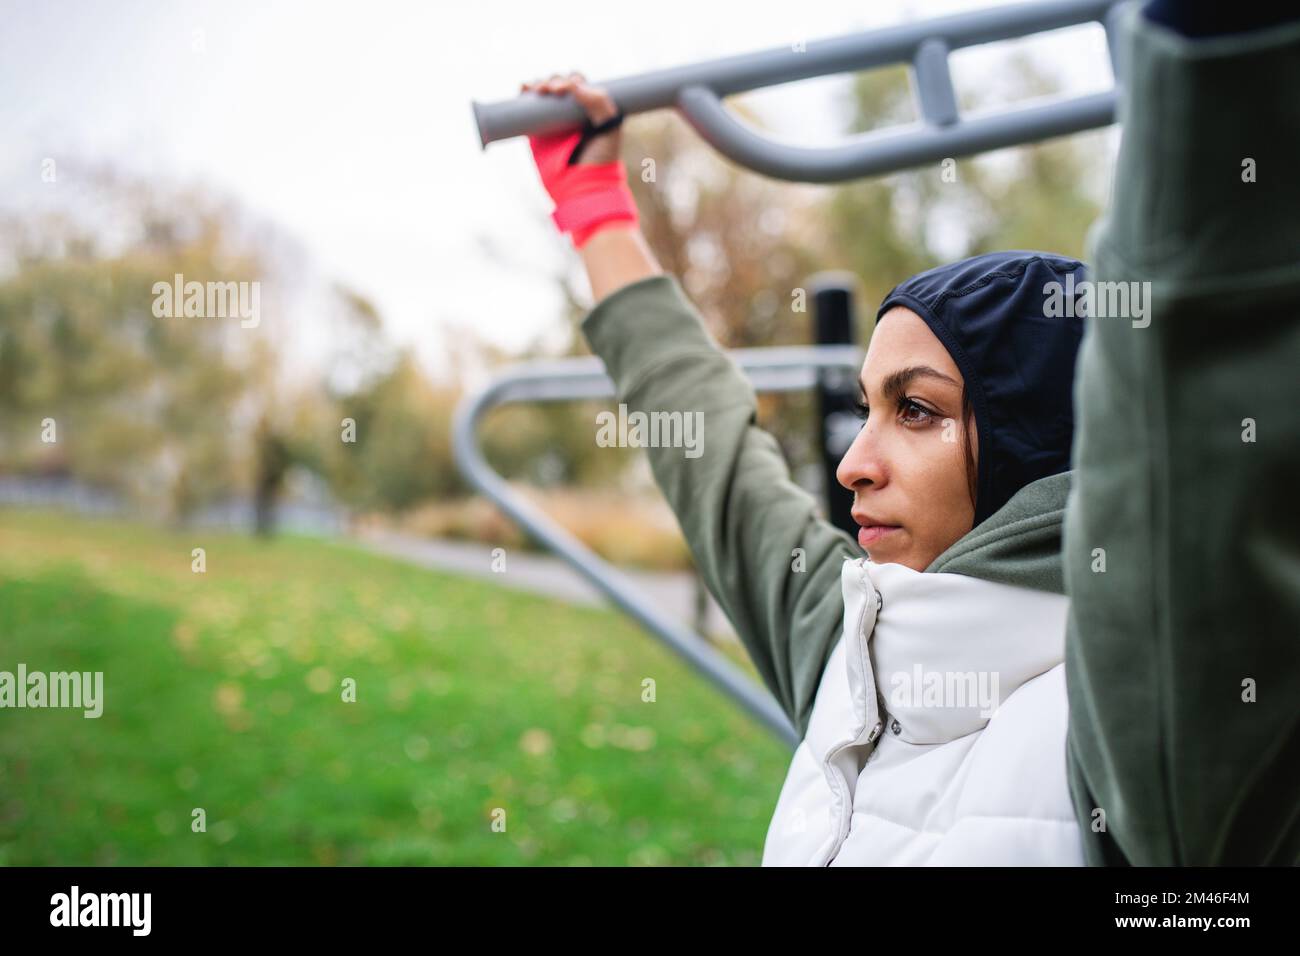 Young muslim woman in sports hijab doing work out in outdoor training ground. Stock Photo